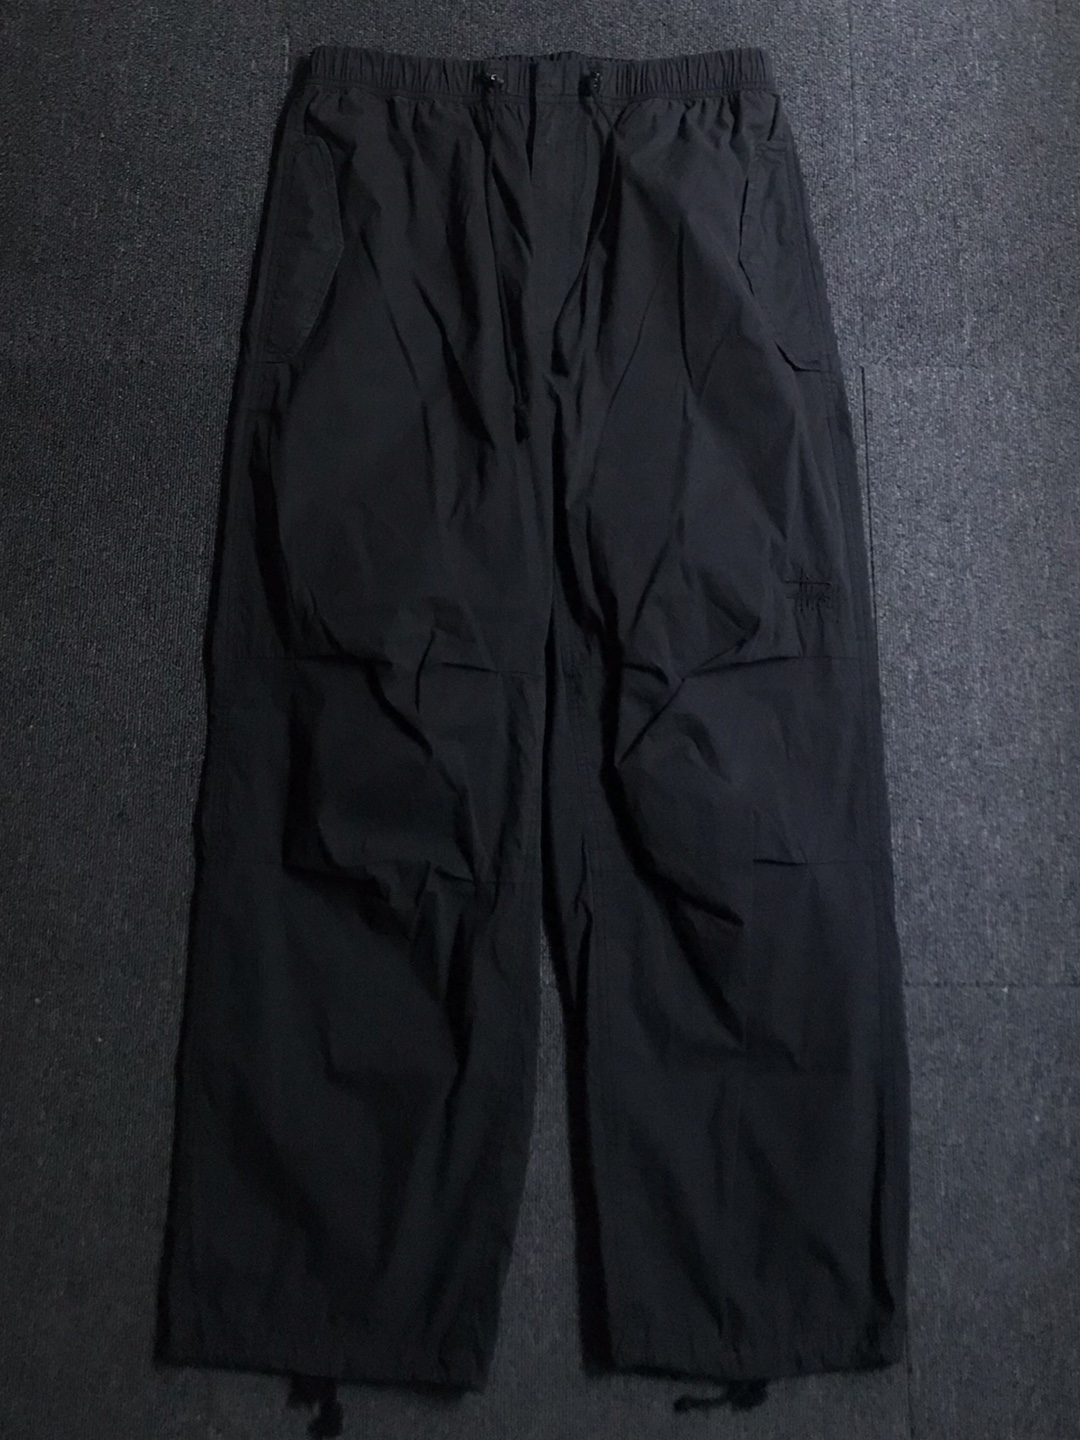 stussy lightweight cotton/nylon banded military pants (M size, 실측 참고)